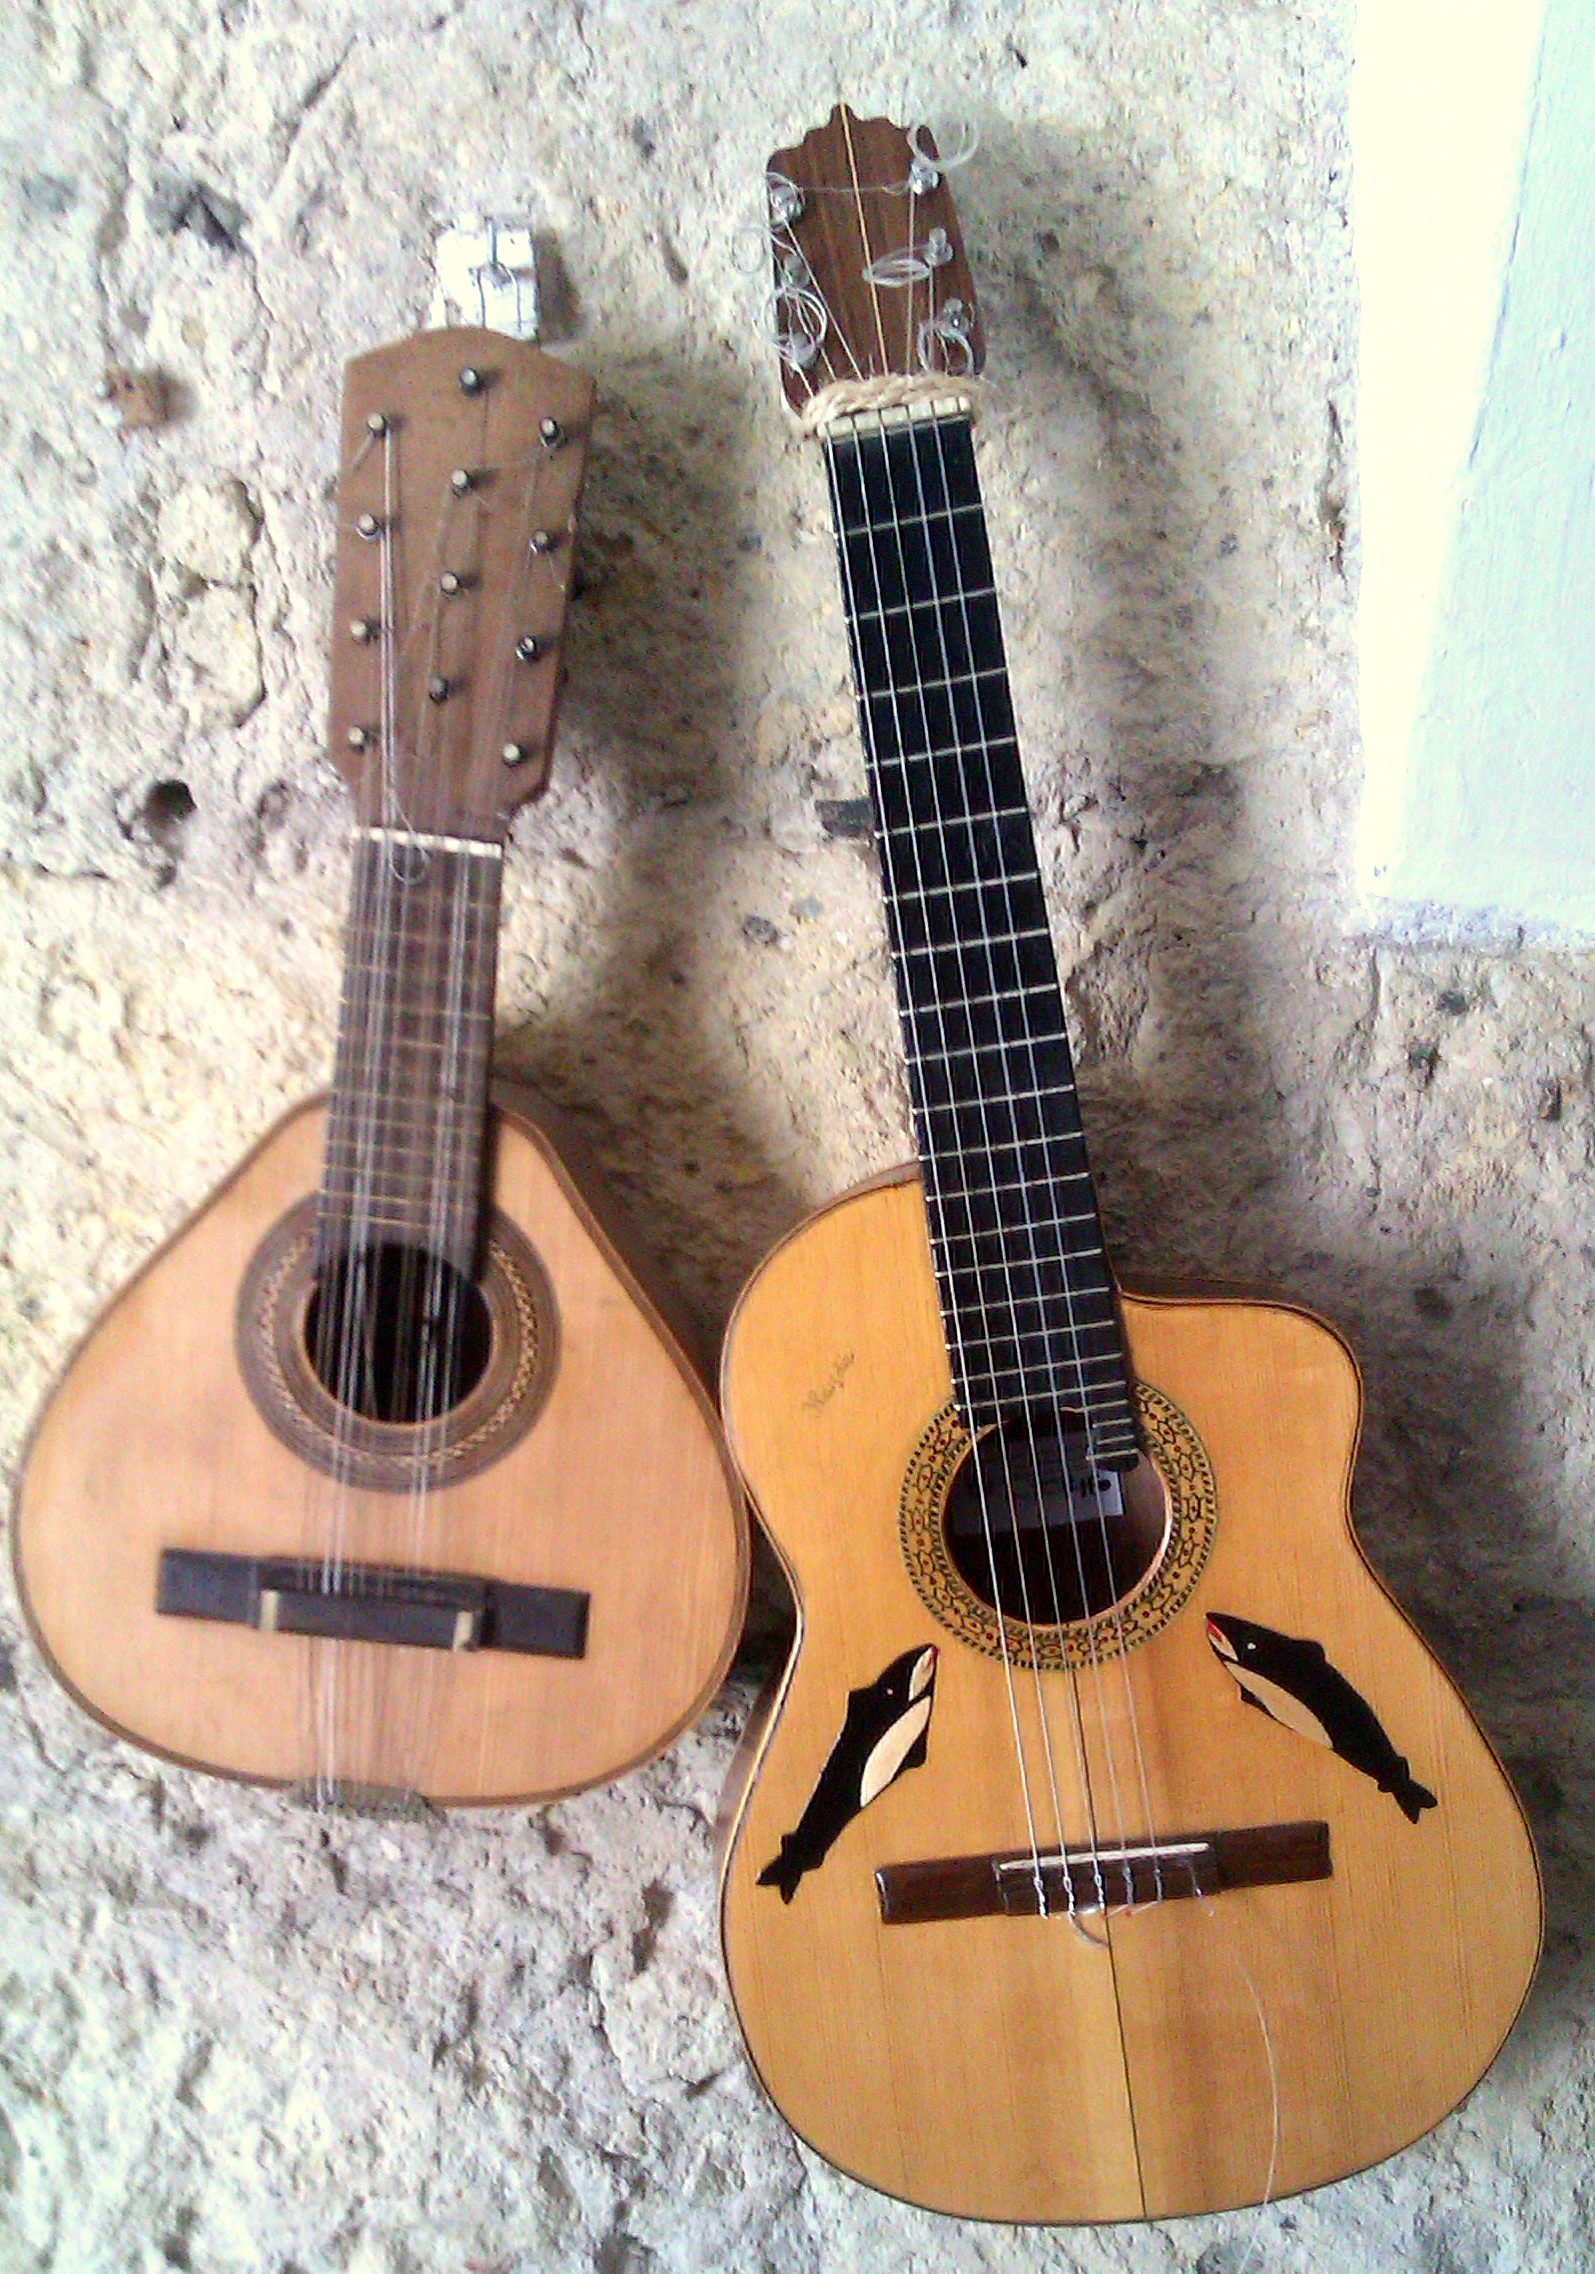 two guitars made from wood, one has a guitar strings on it